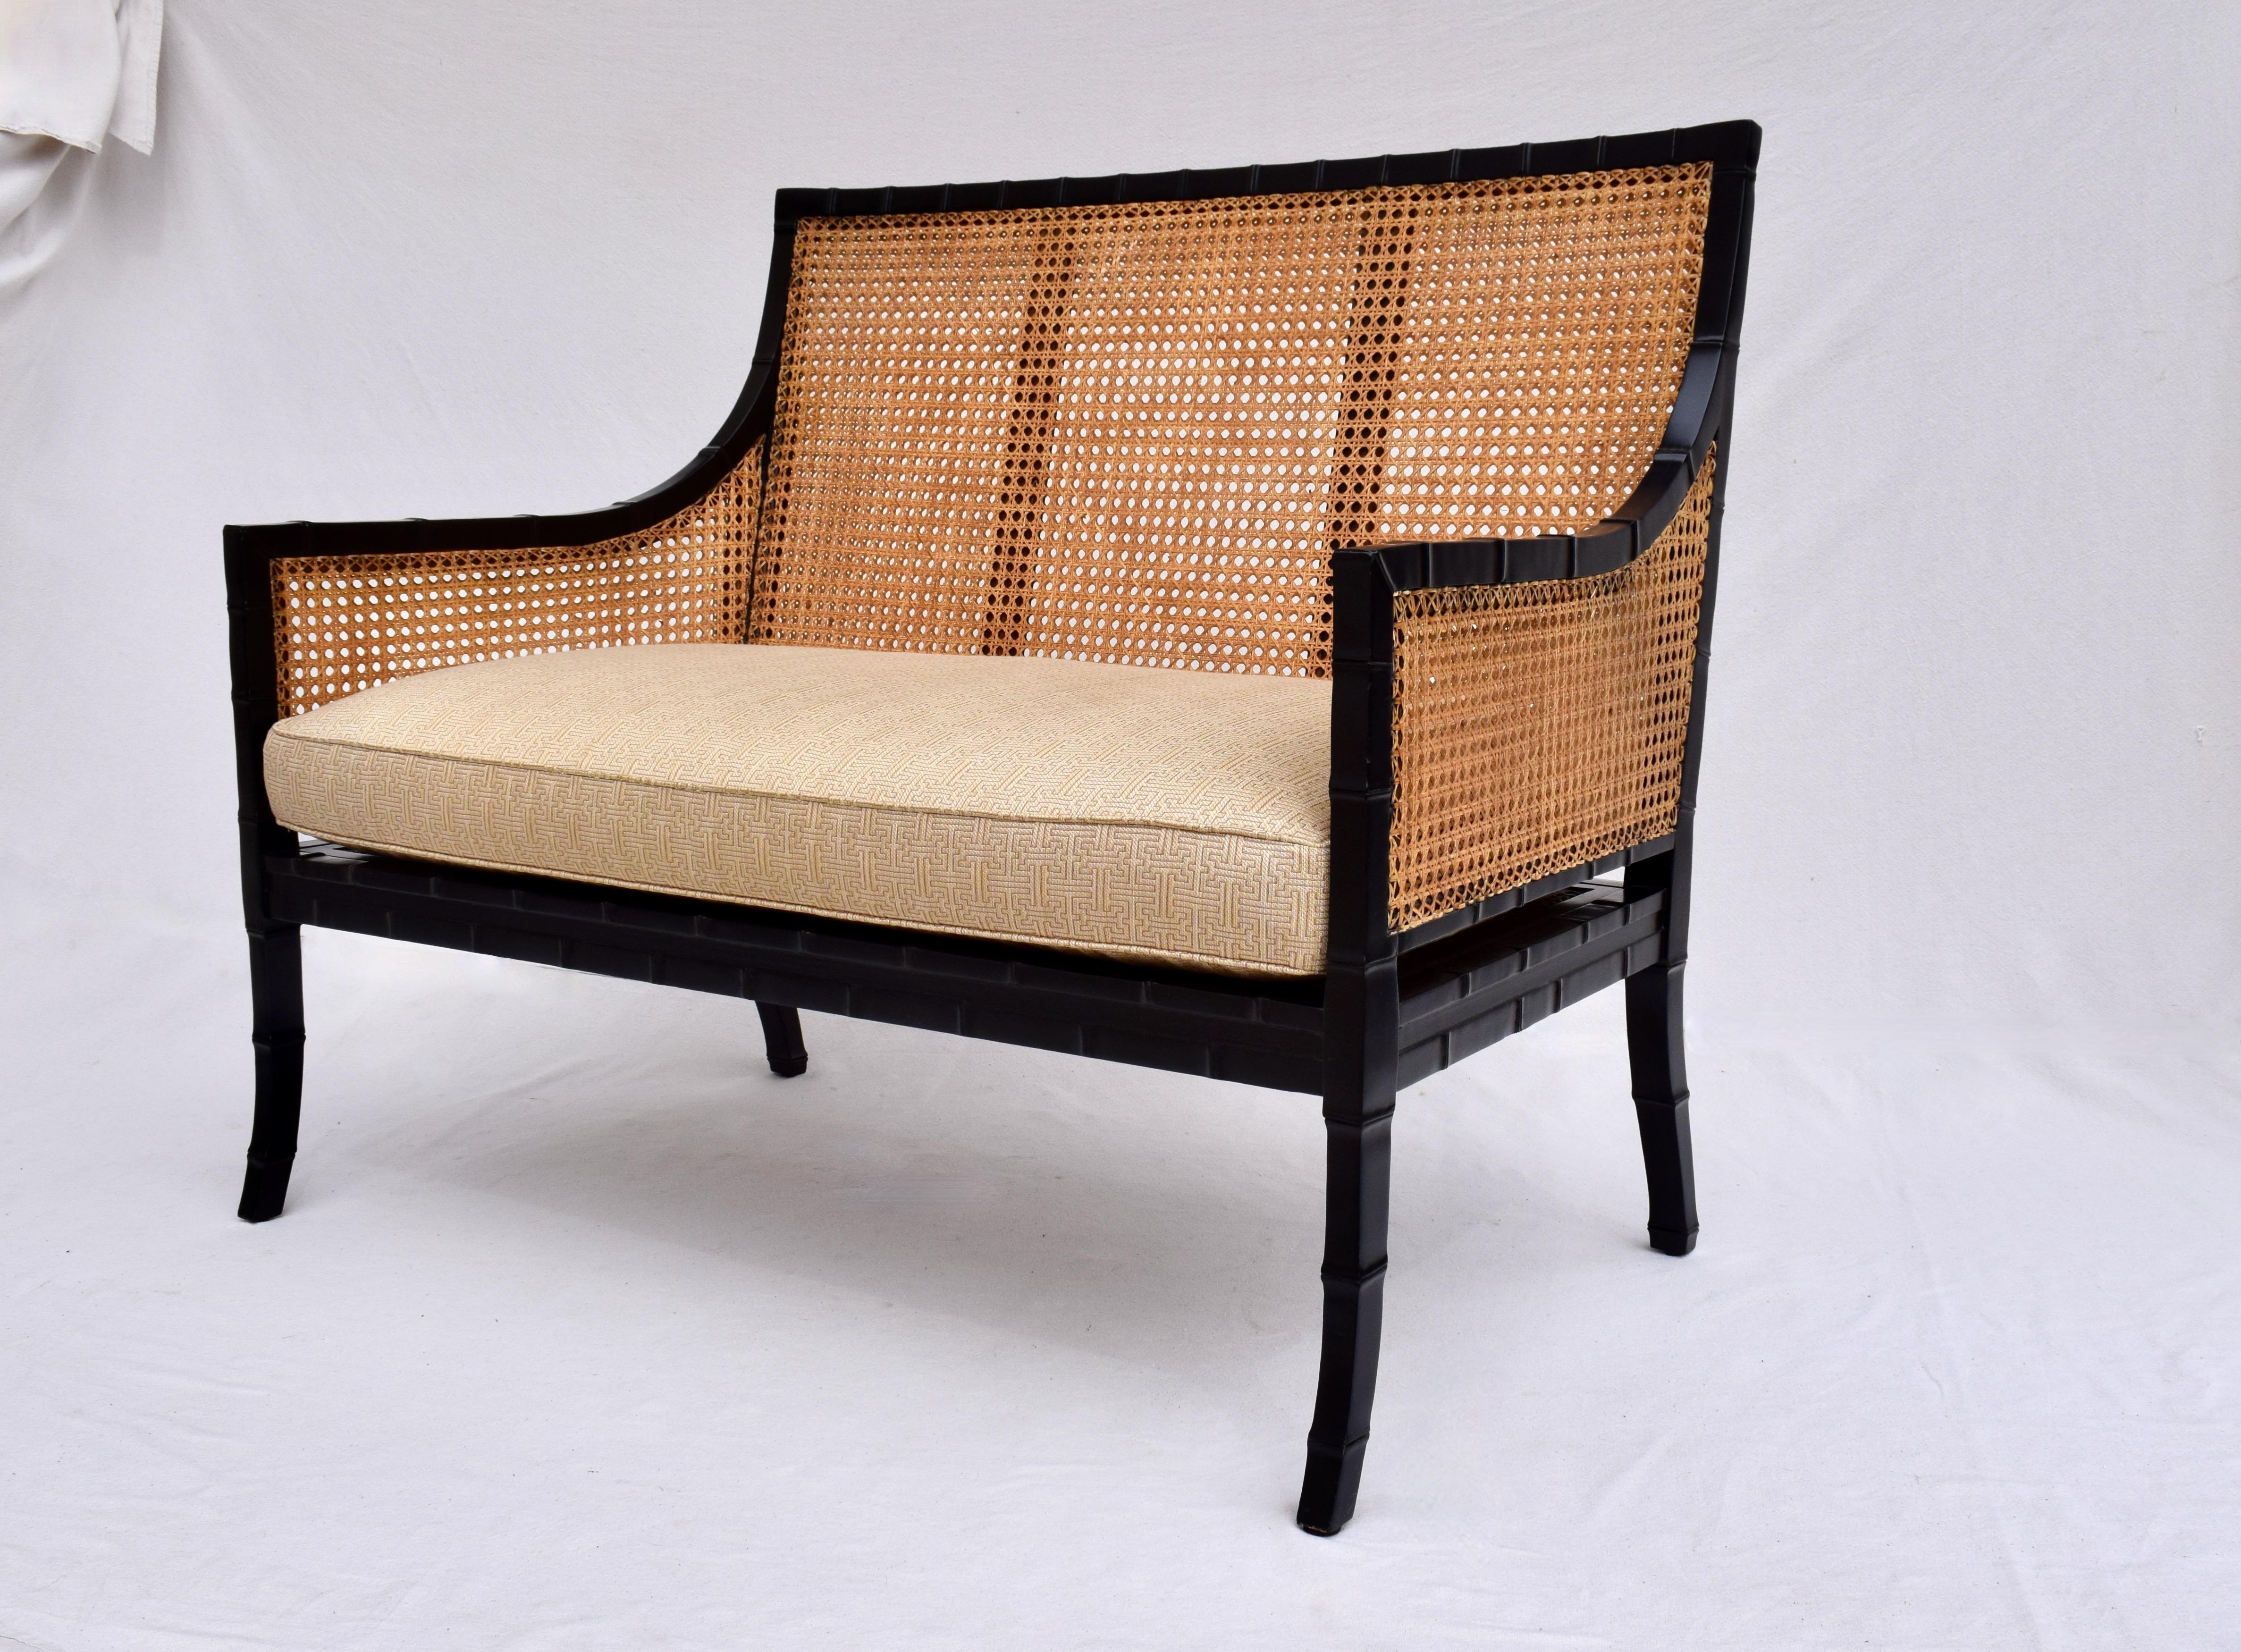 American Large Scale Double Cane Settee